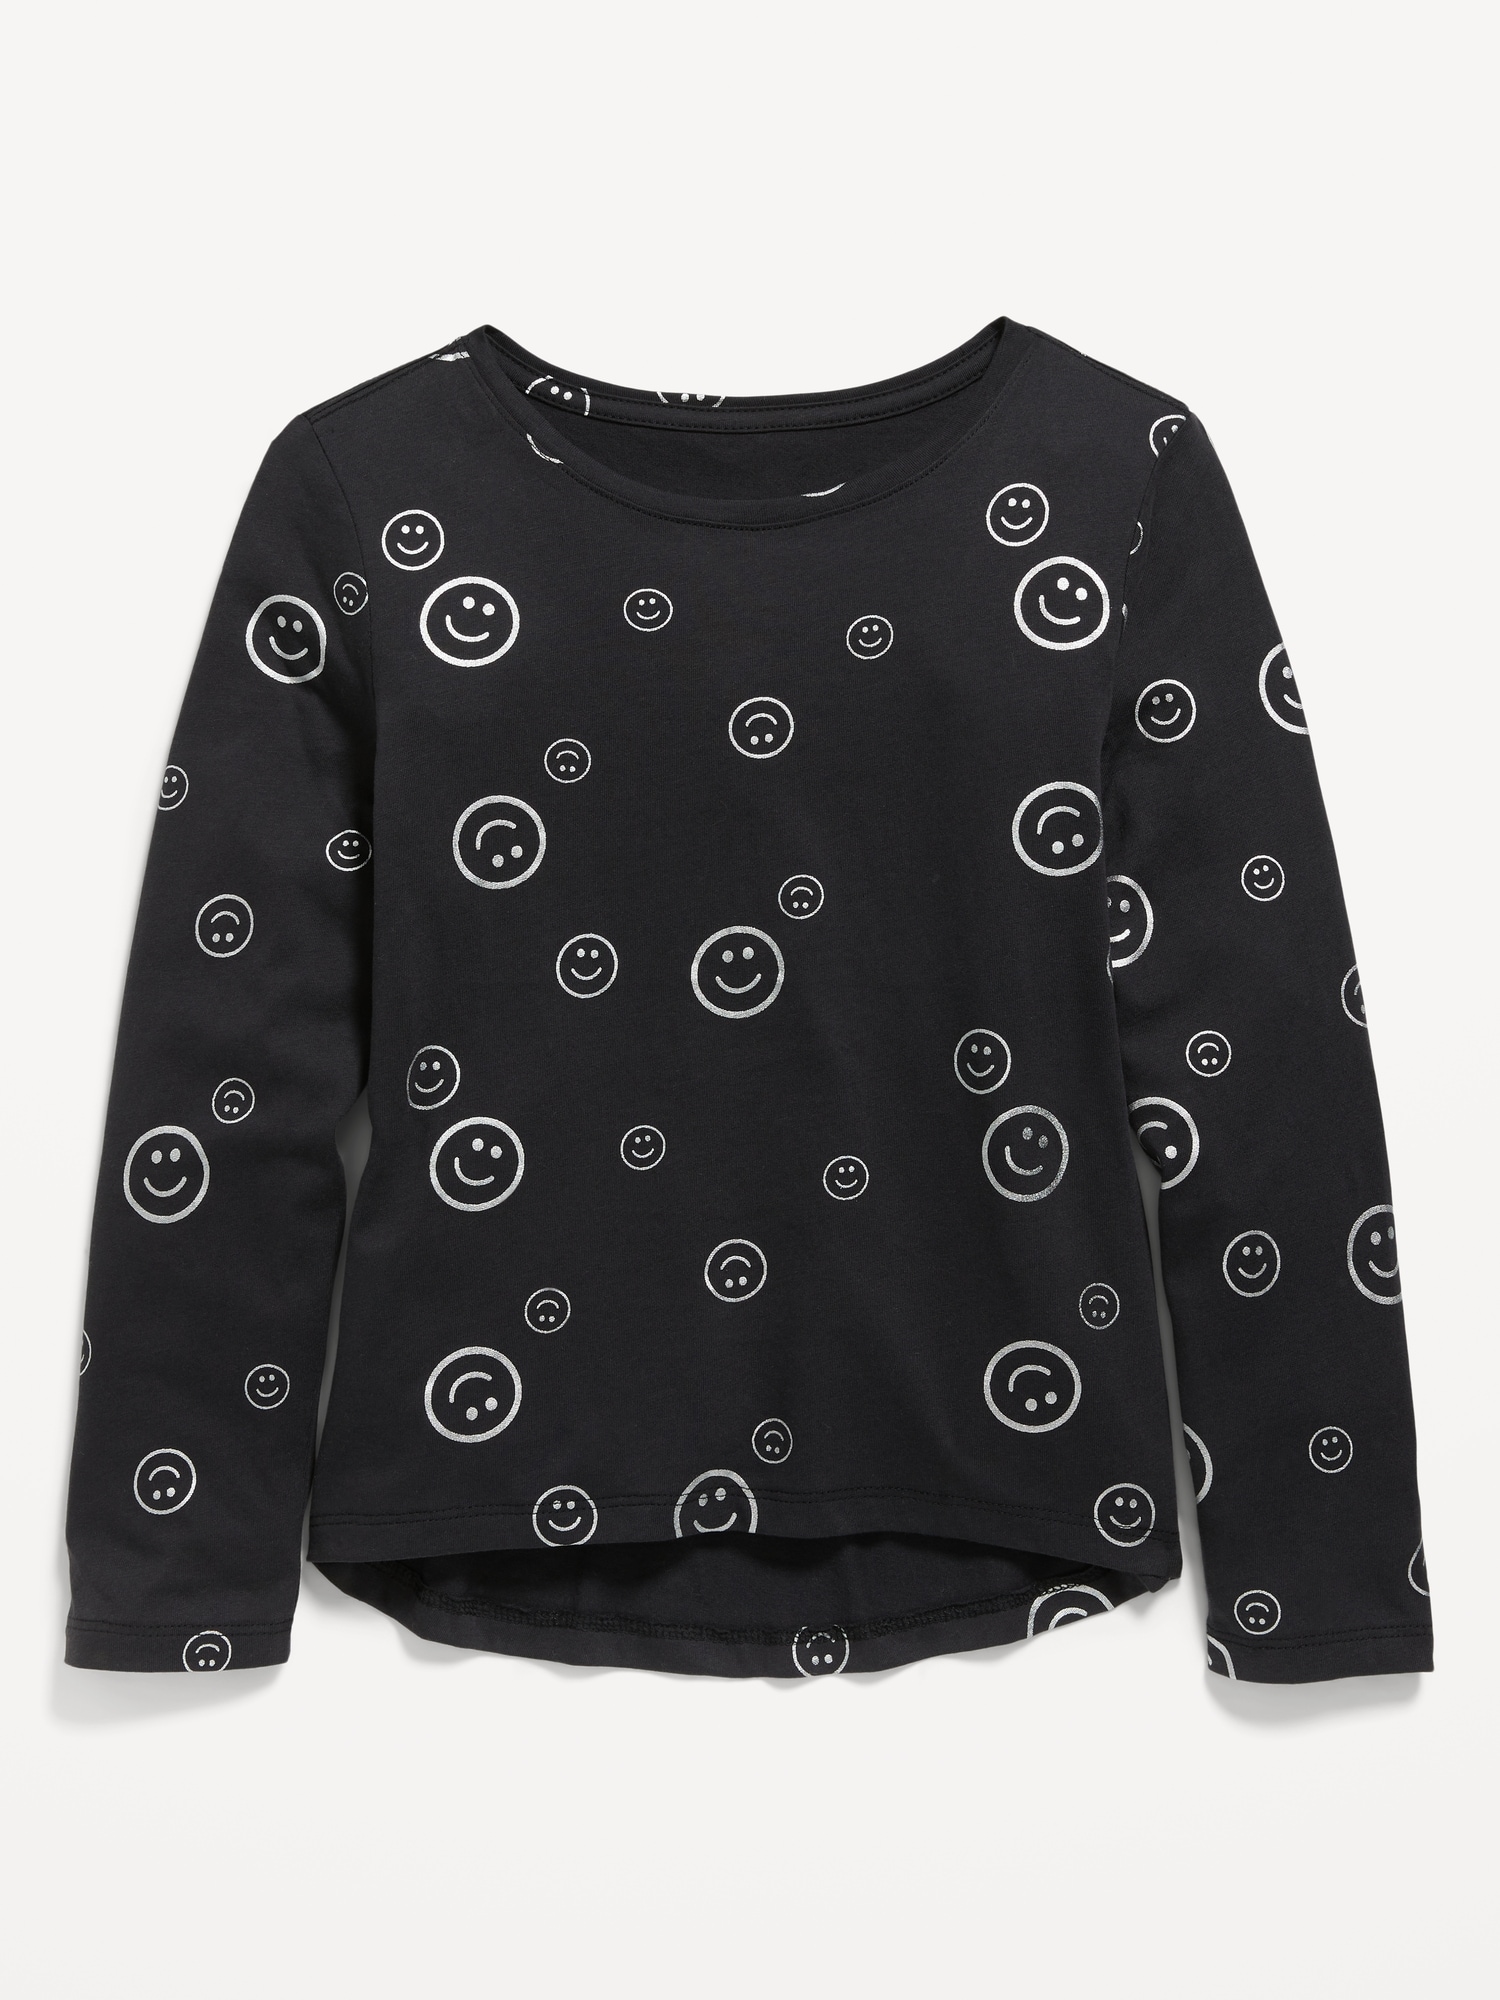 Softest Long-Sleeve Printed T-Shirt for Girls